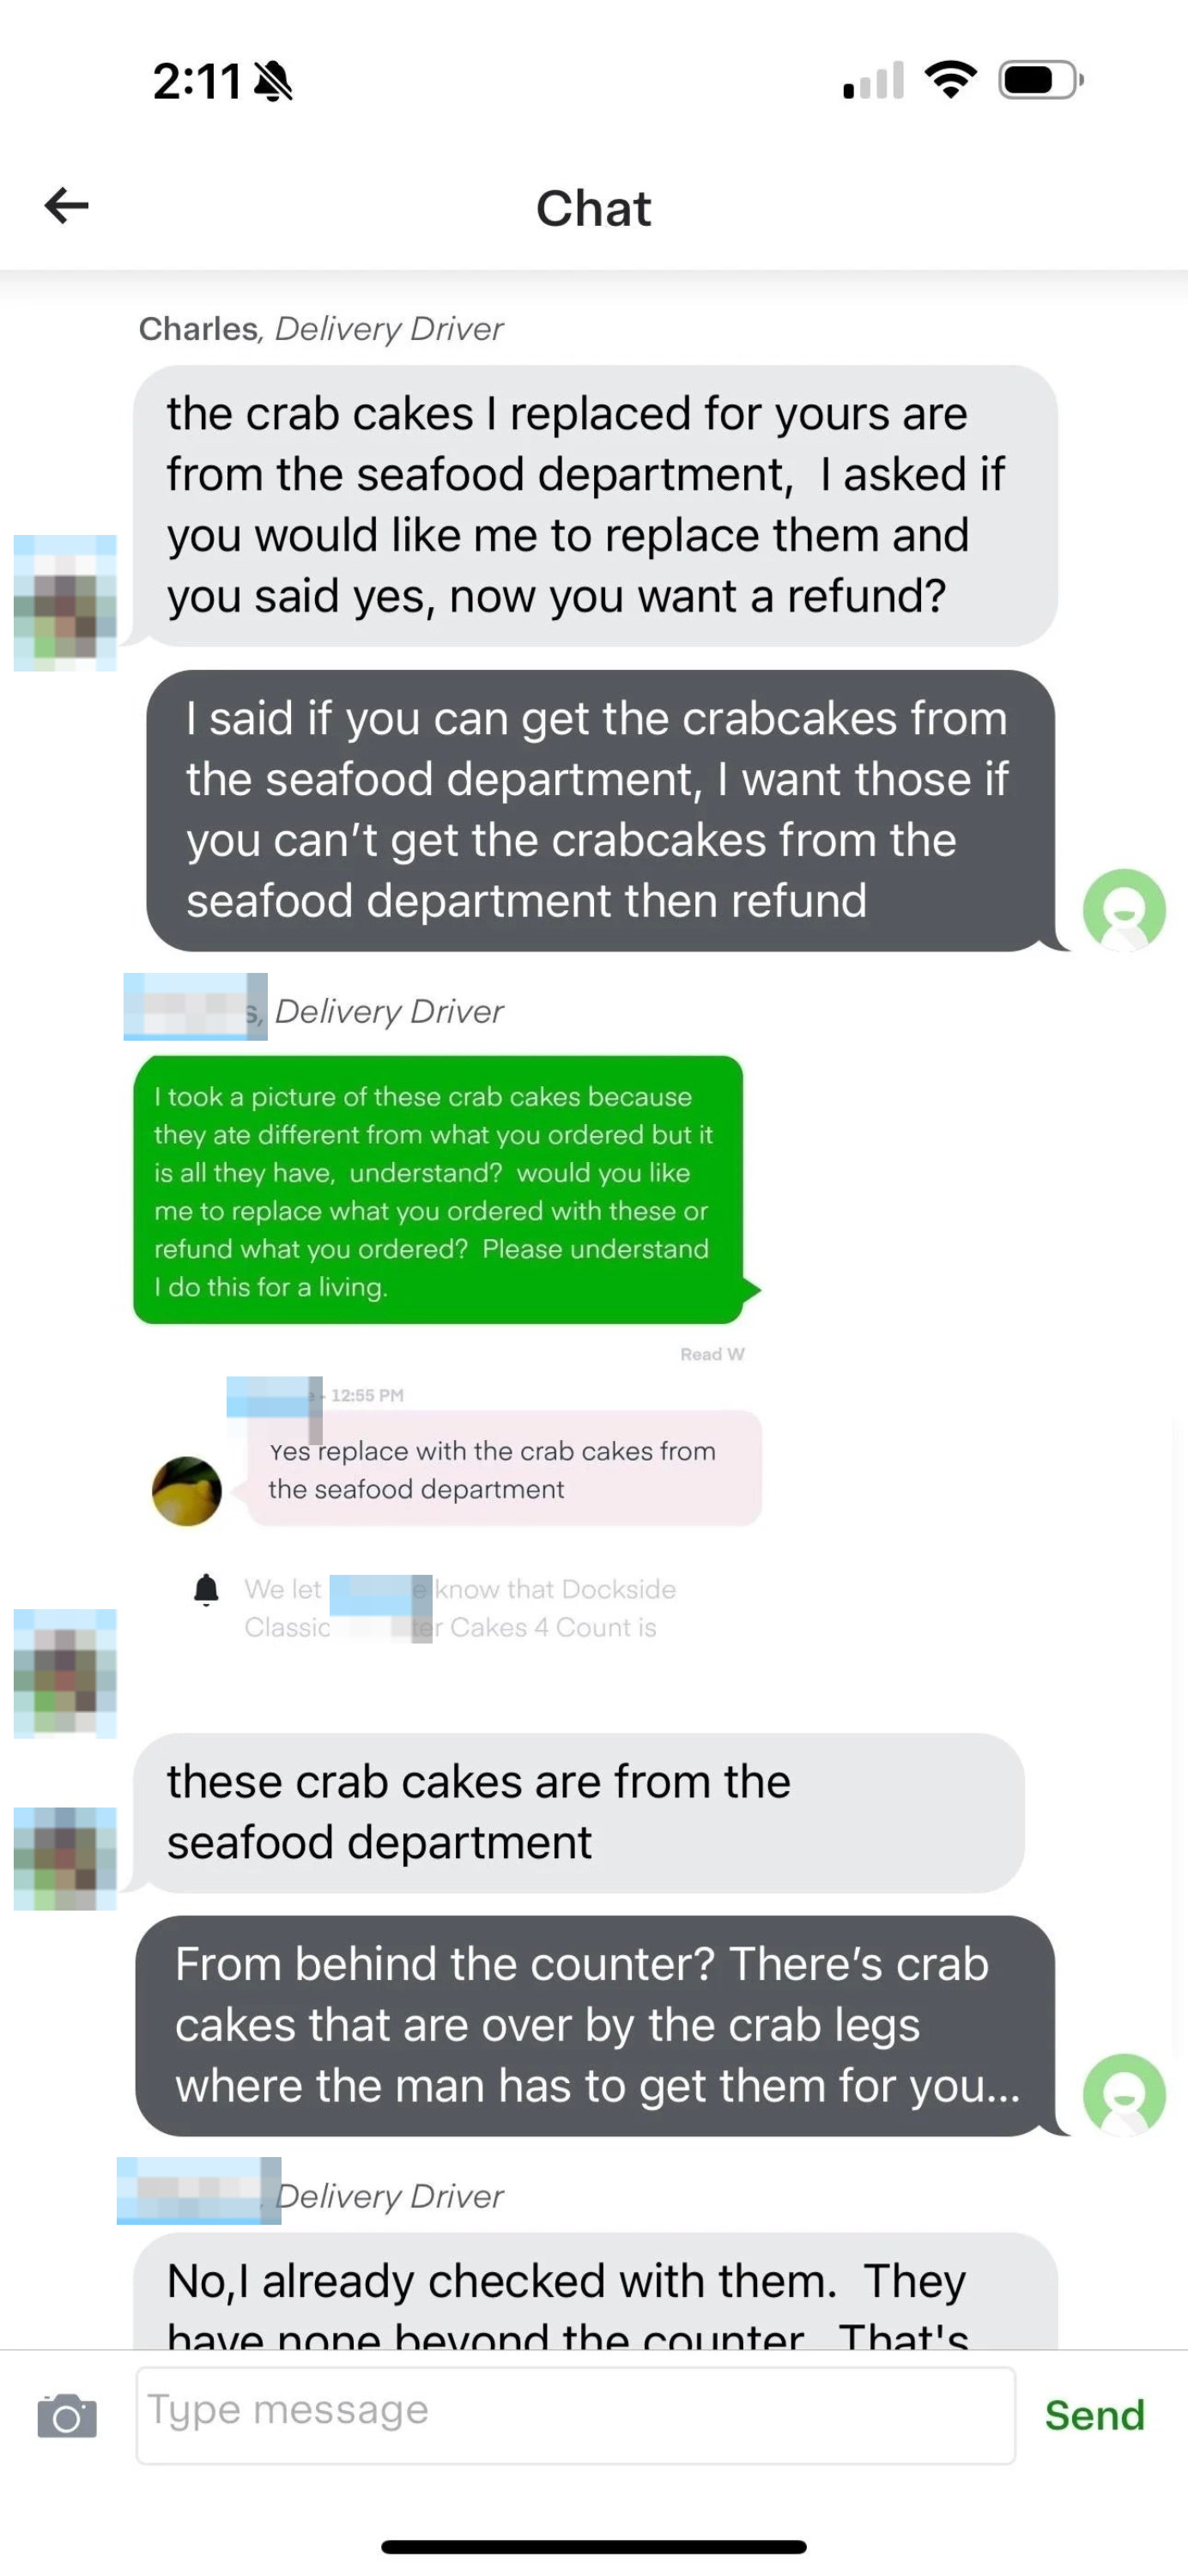 Chat screenshots between two people discussing a delivery issue with seafood and replacement crab cakes, with visible timestamps